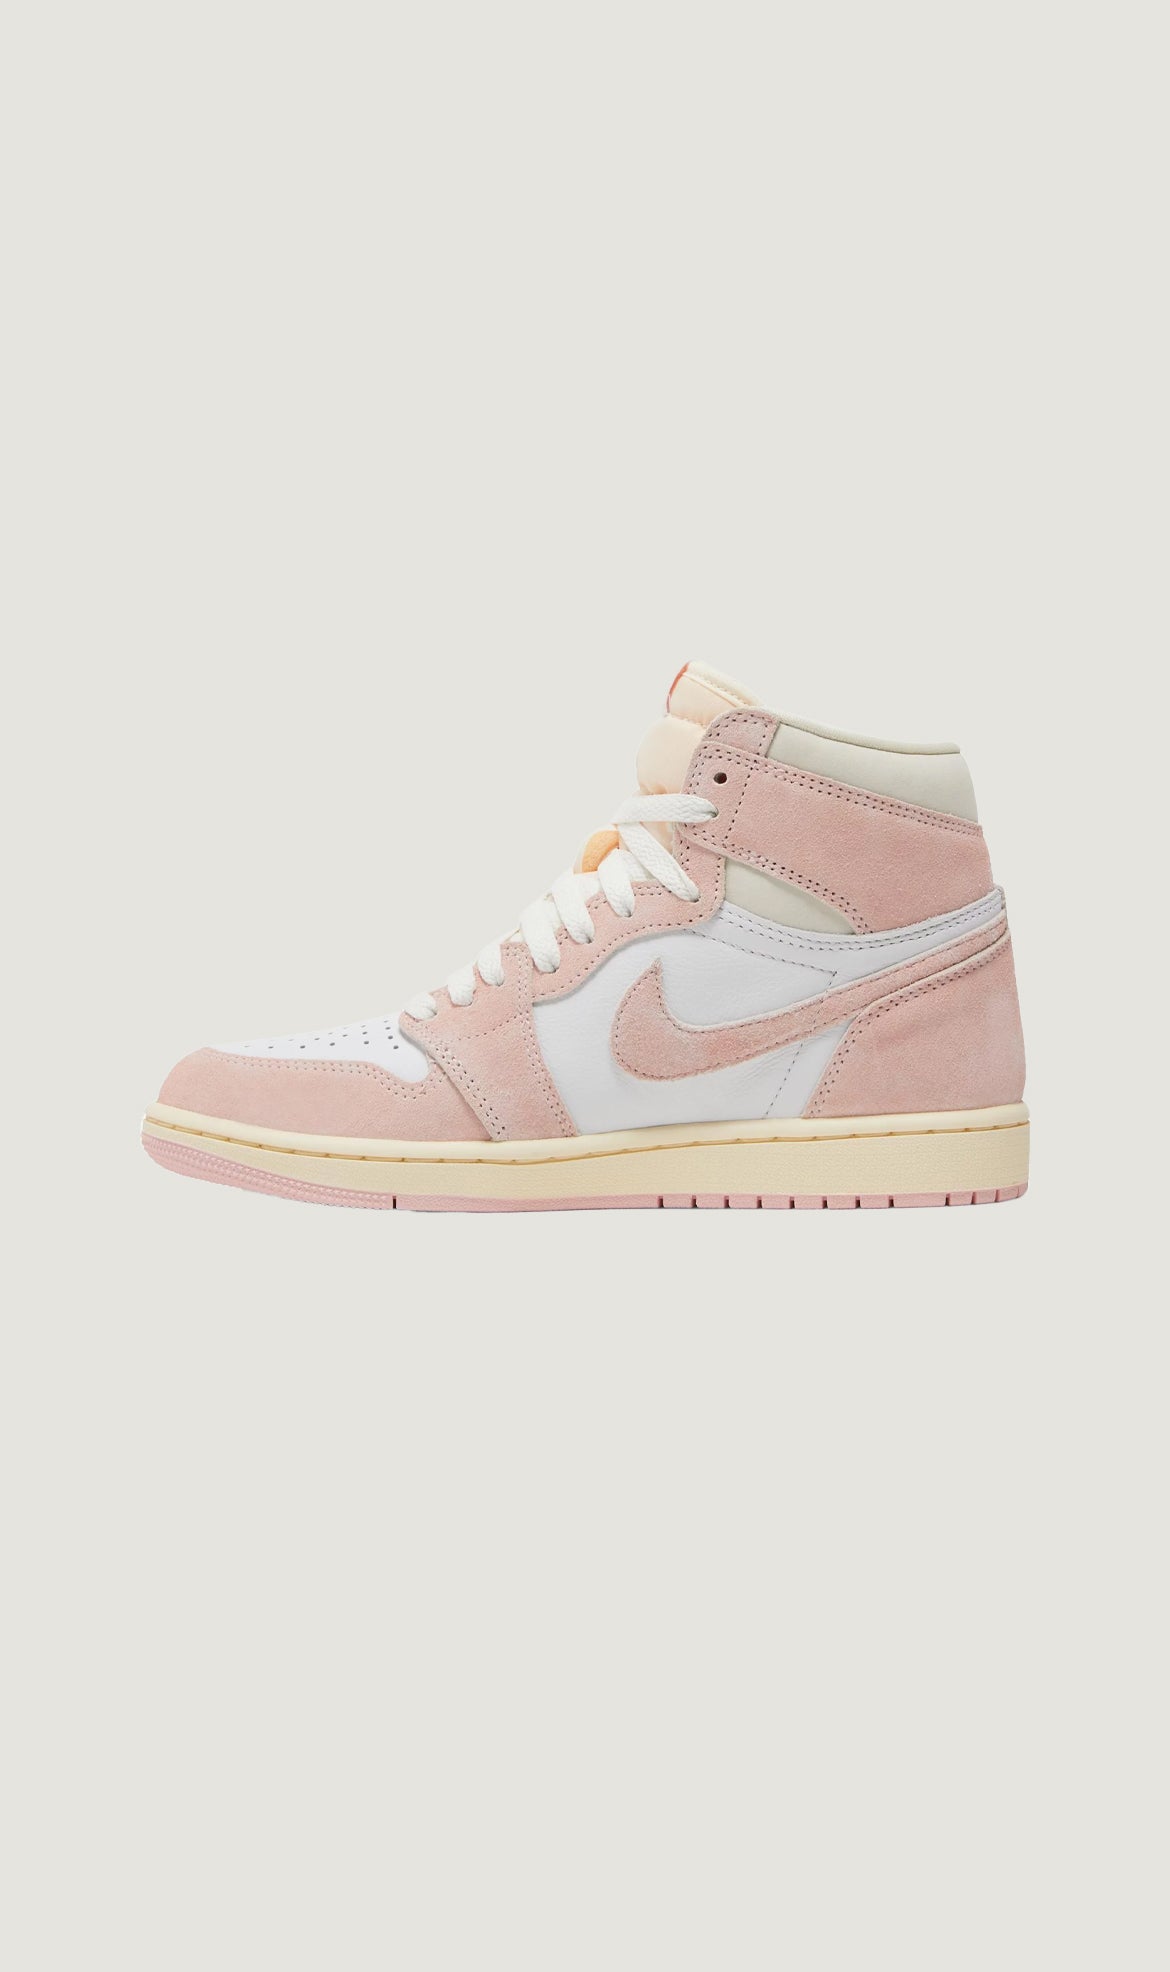 Load image into Gallery viewer, WMNS AIR JORDAN 1 RETRO HIGH OG - WASHED PINK
